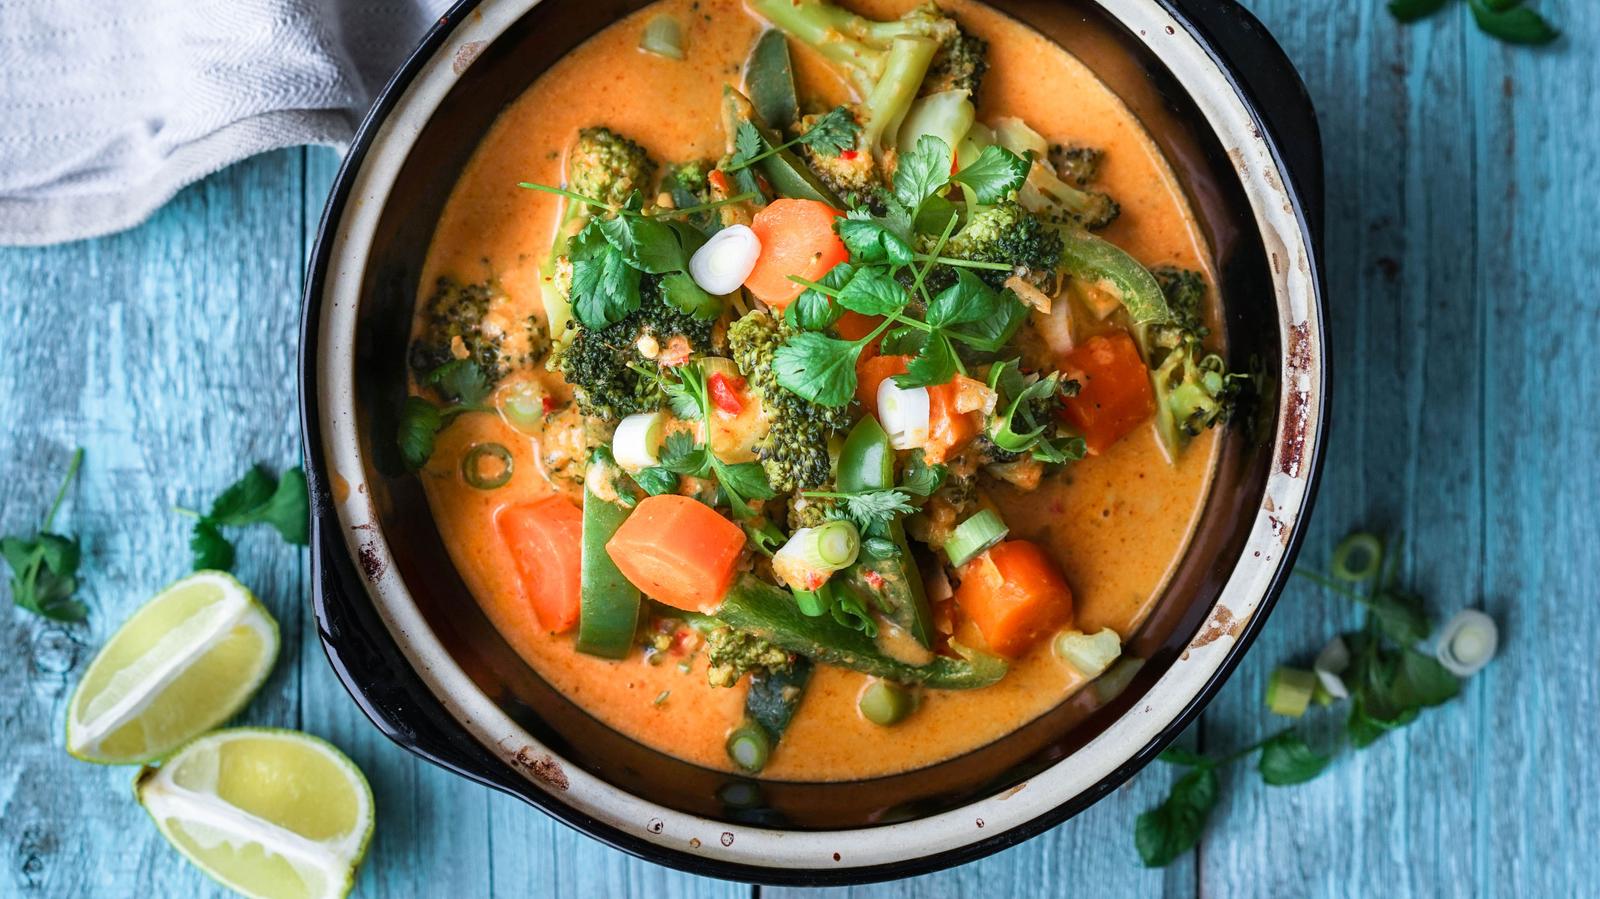 Rask red curry